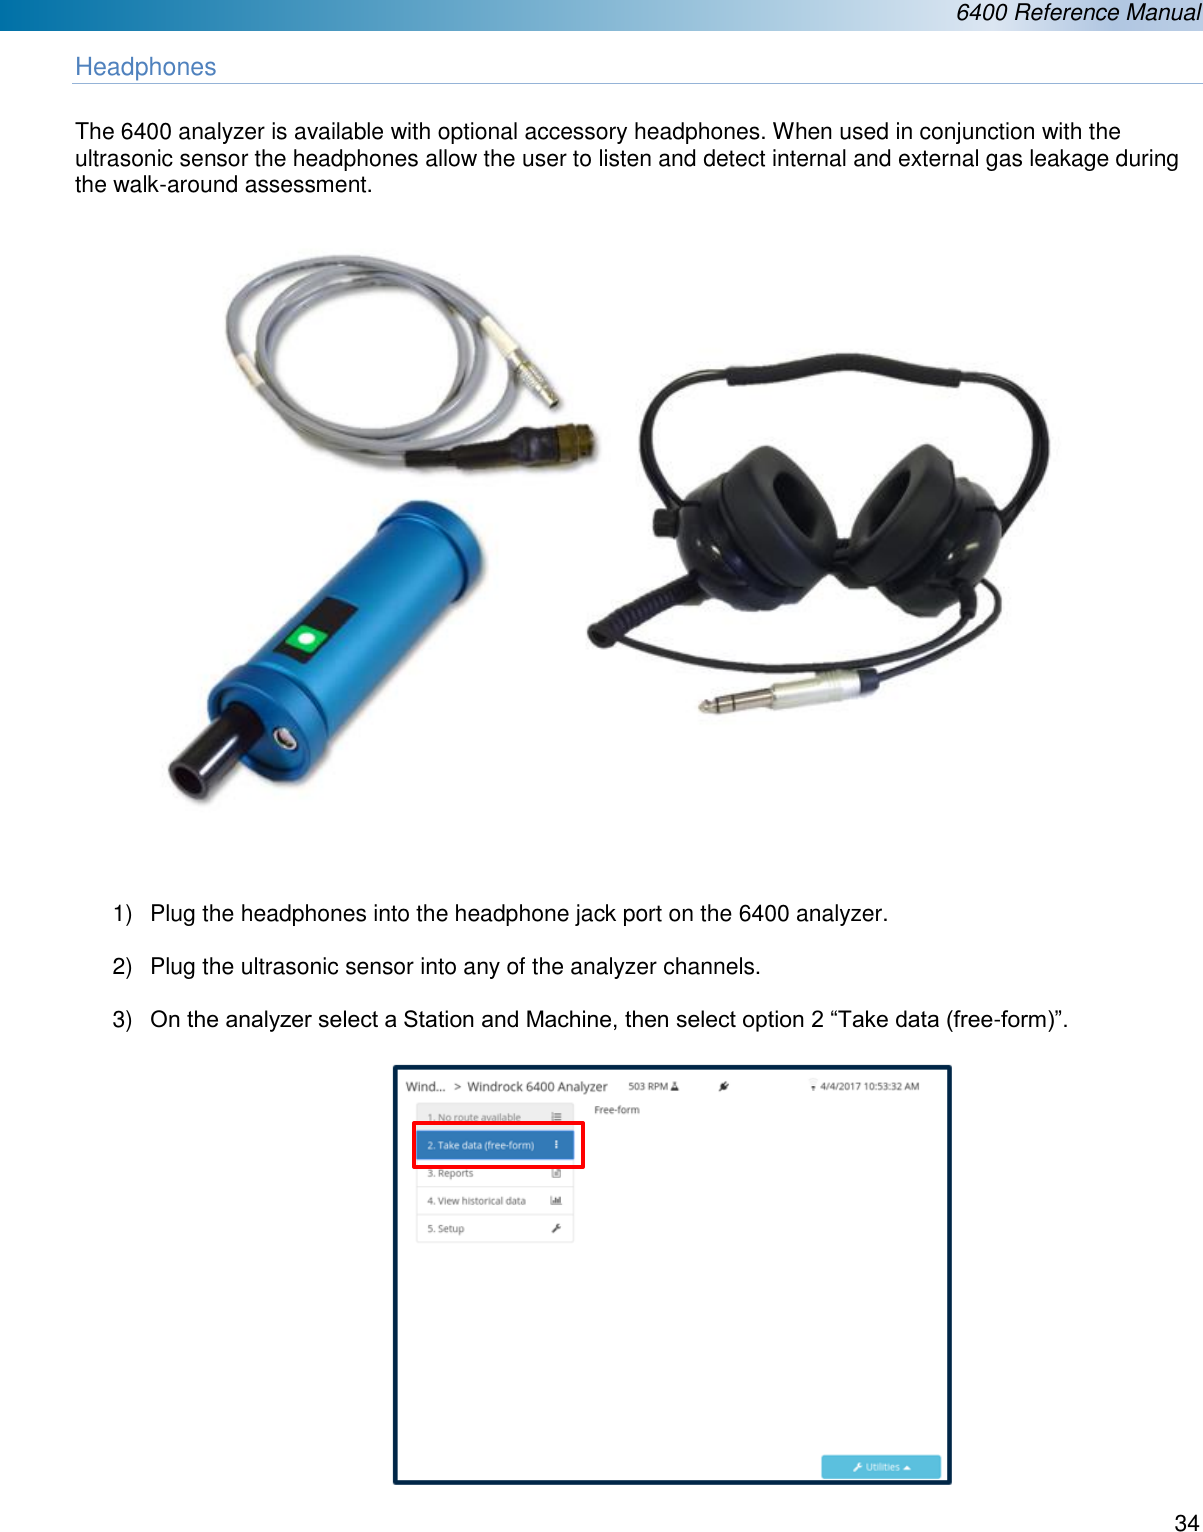  6400 Reference Manual  34  Headphones  The 6400 analyzer is available with optional accessory headphones. When used in conjunction with the ultrasonic sensor the headphones allow the user to listen and detect internal and external gas leakage during the walk-around assessment.    1)  Plug the headphones into the headphone jack port on the 6400 analyzer.  2)  Plug the ultrasonic sensor into any of the analyzer channels.  3) On the analyzer select a Station and Machine, then select option 2 “Take data (free-form)”.          